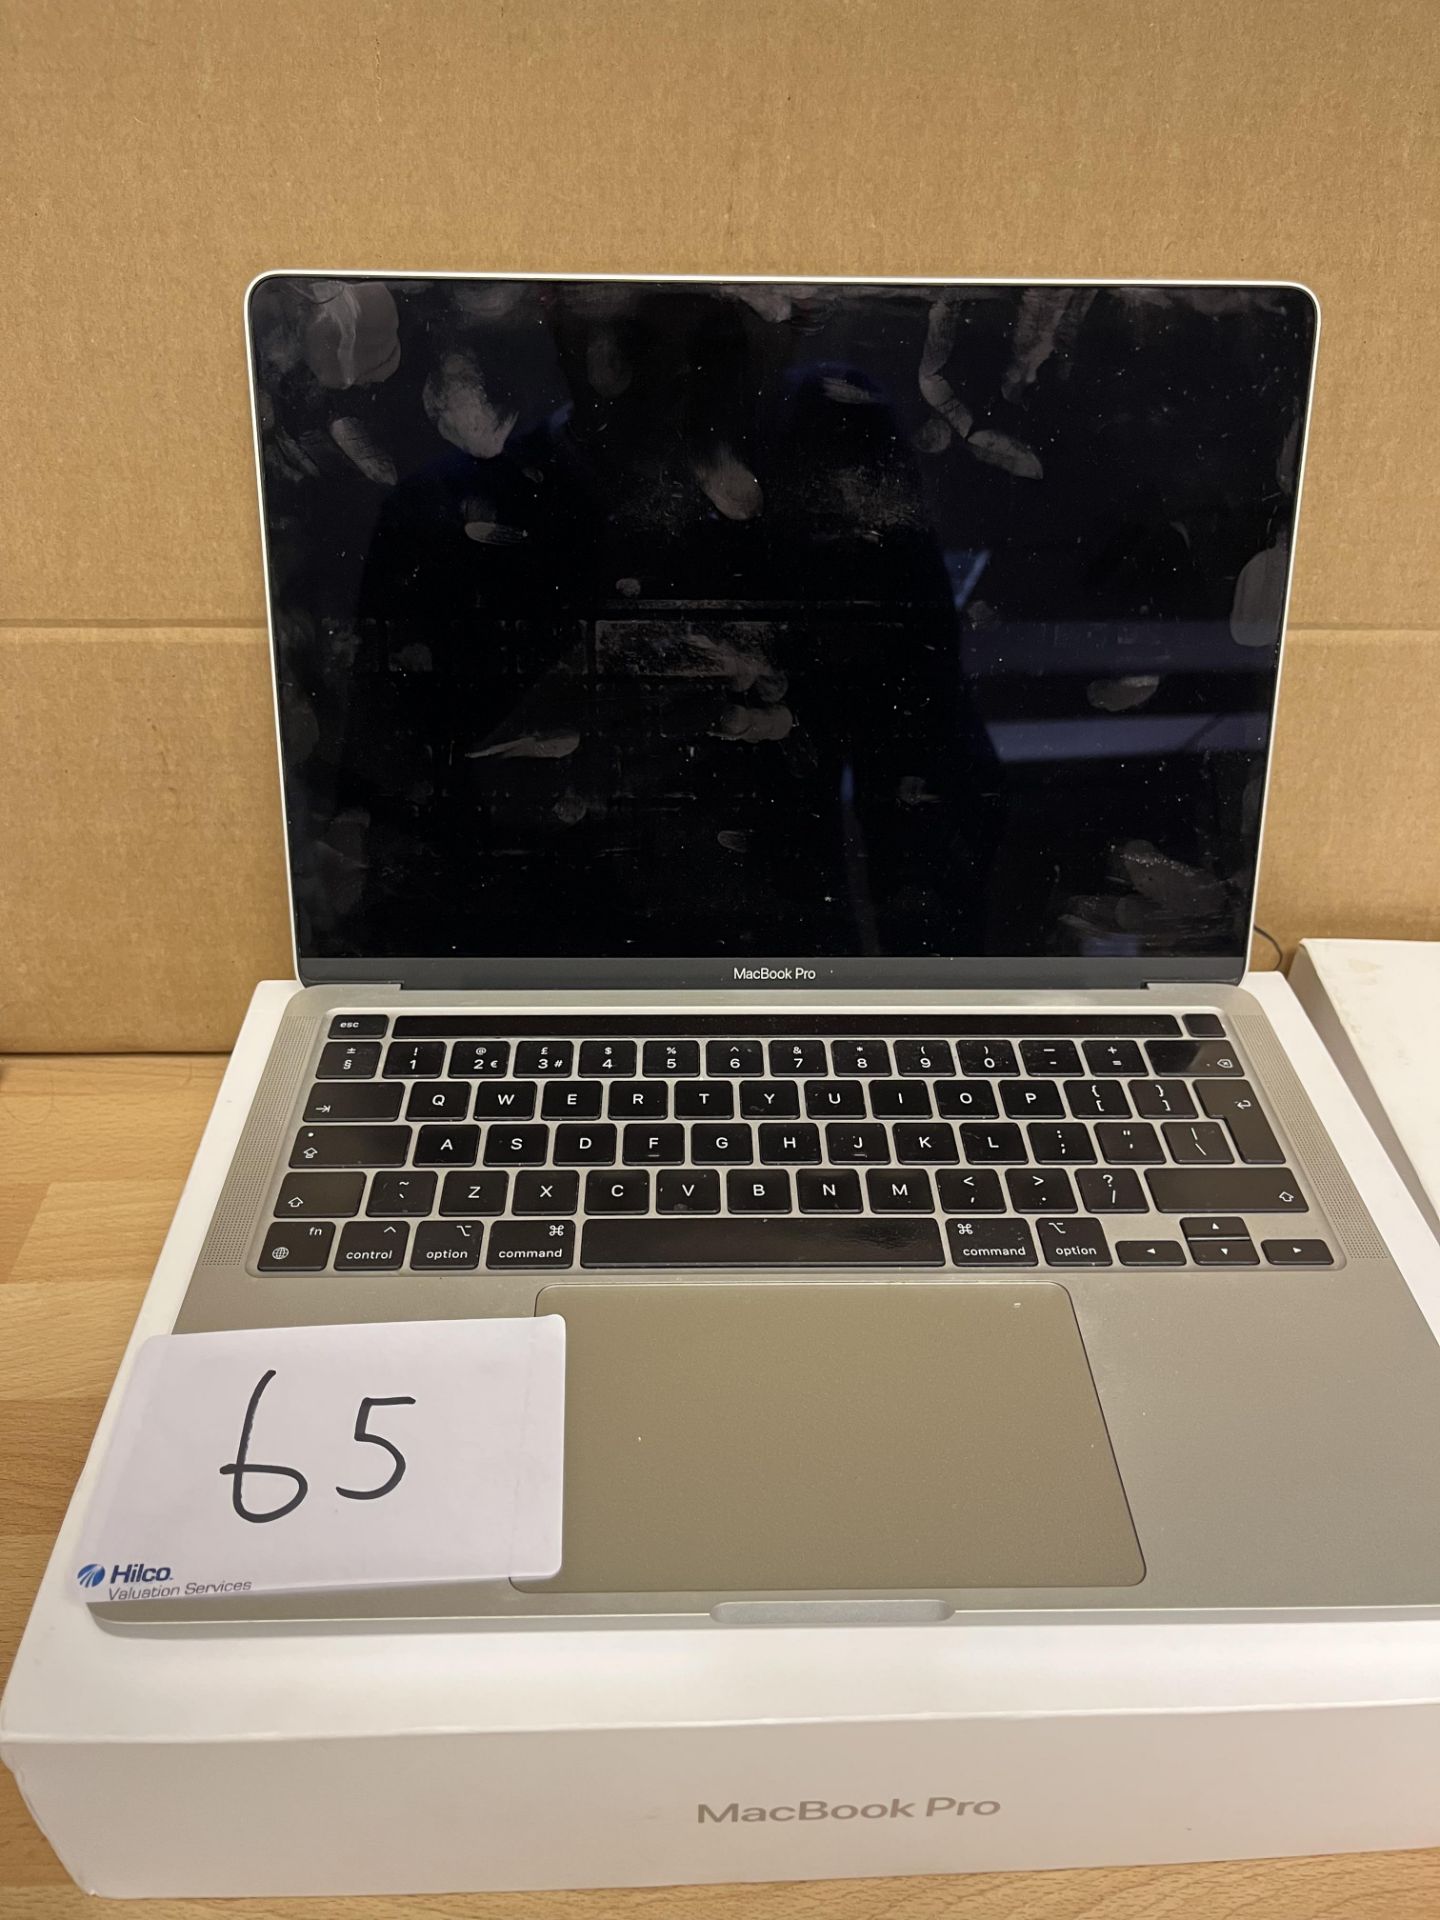 Macbook Pro 13-inch 2020 16GB No charger, with box Serial Number FVFF5C7QQ05G